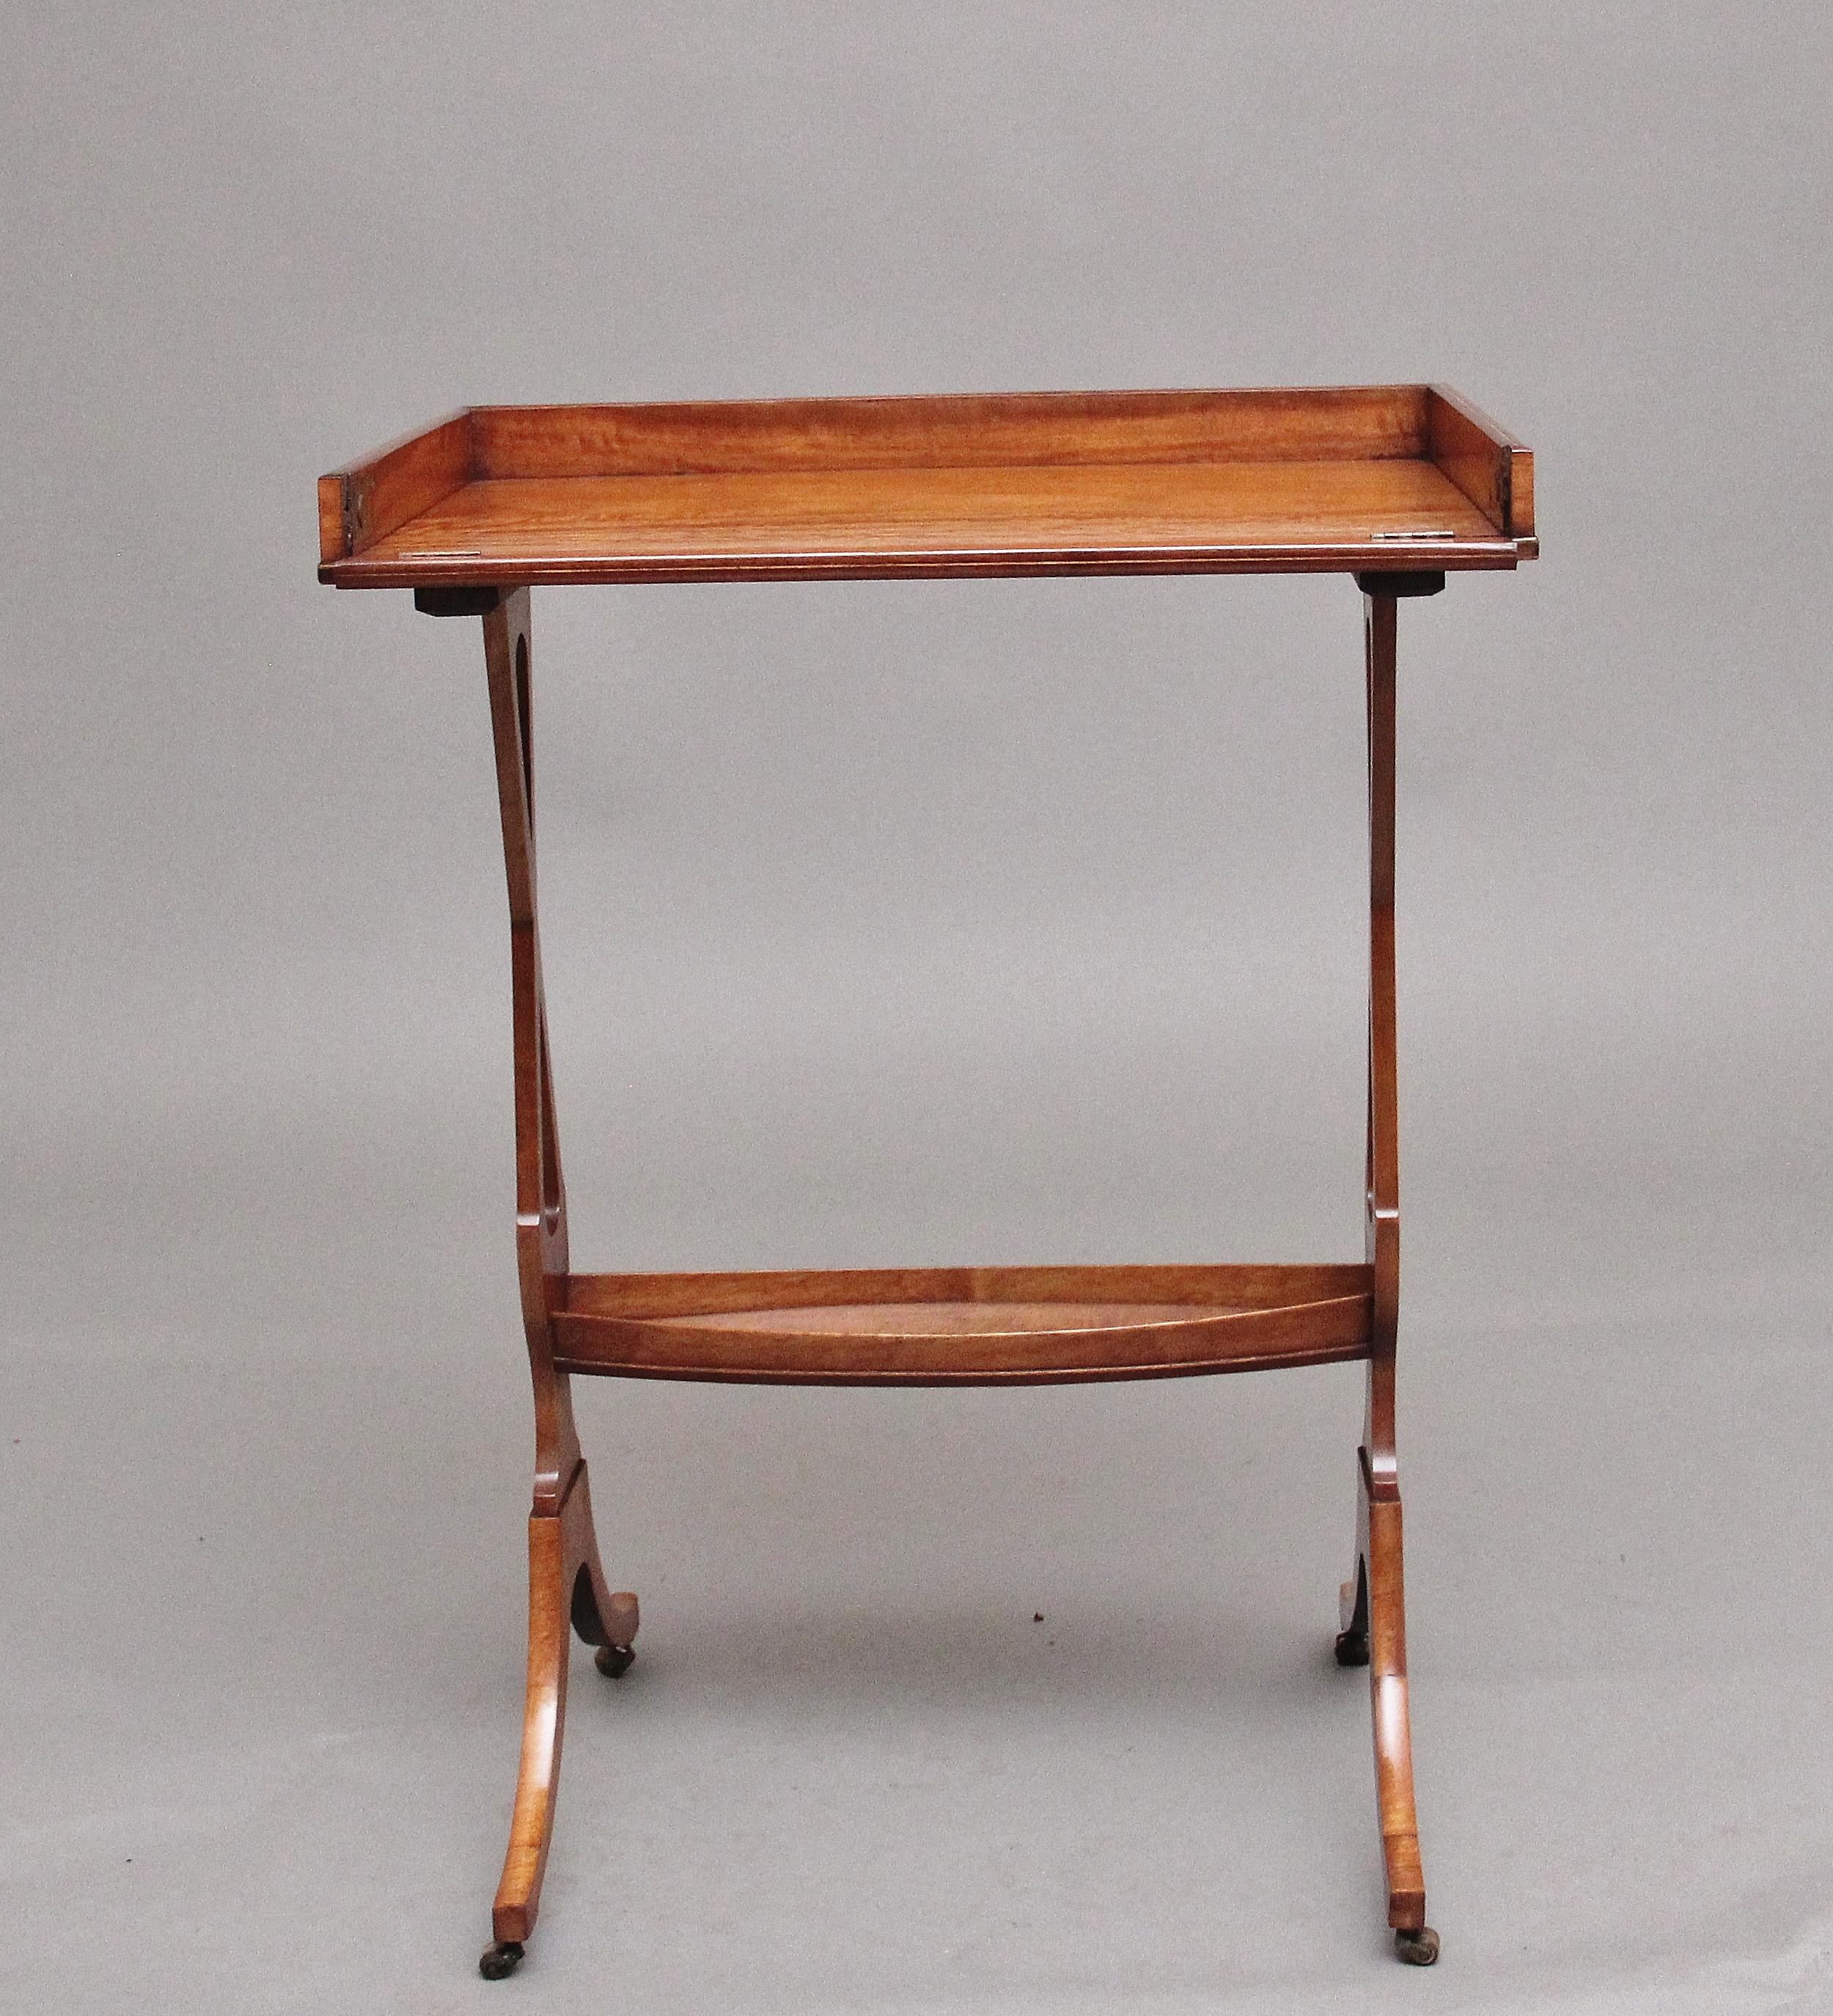 British 19th Century Sheraton Revival Satinwood Serving Table For Sale